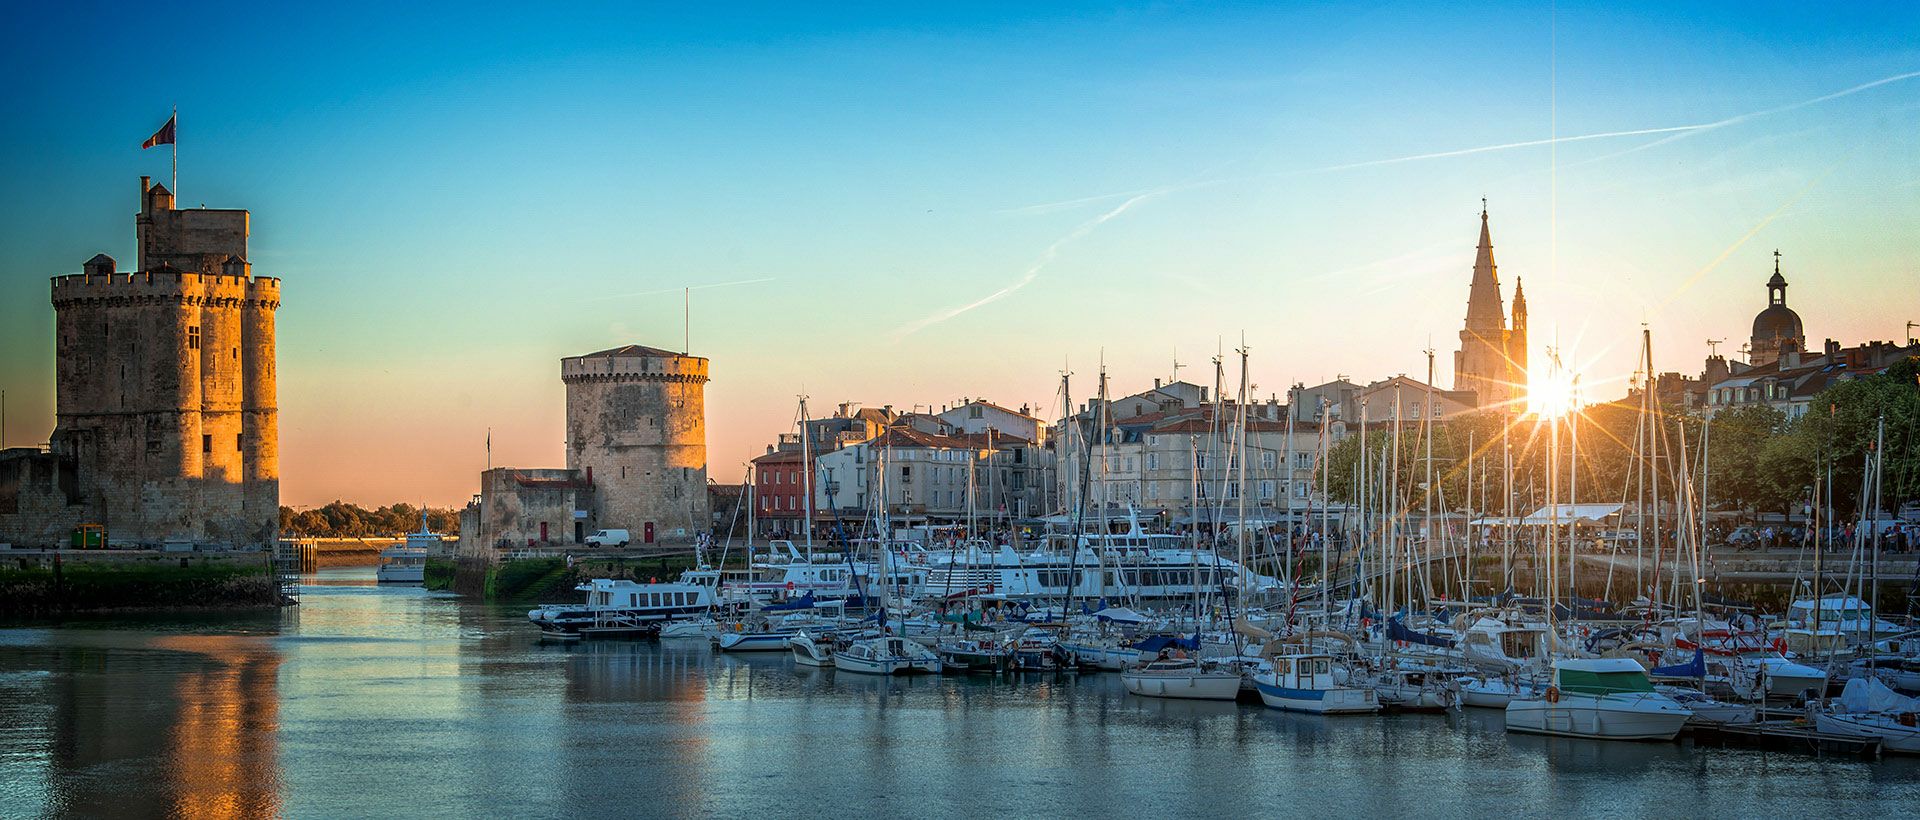 Top 7 Sights to See in La Rochelle